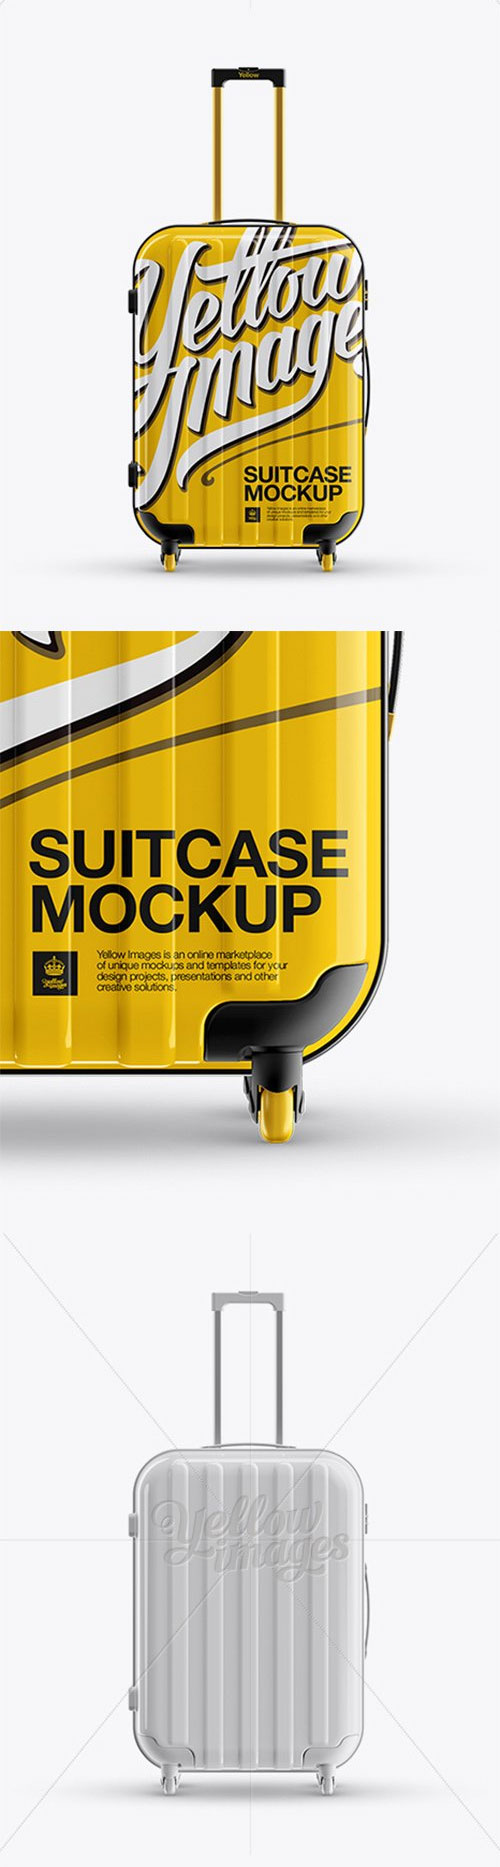 Travel Suitecase Mockup - Front View